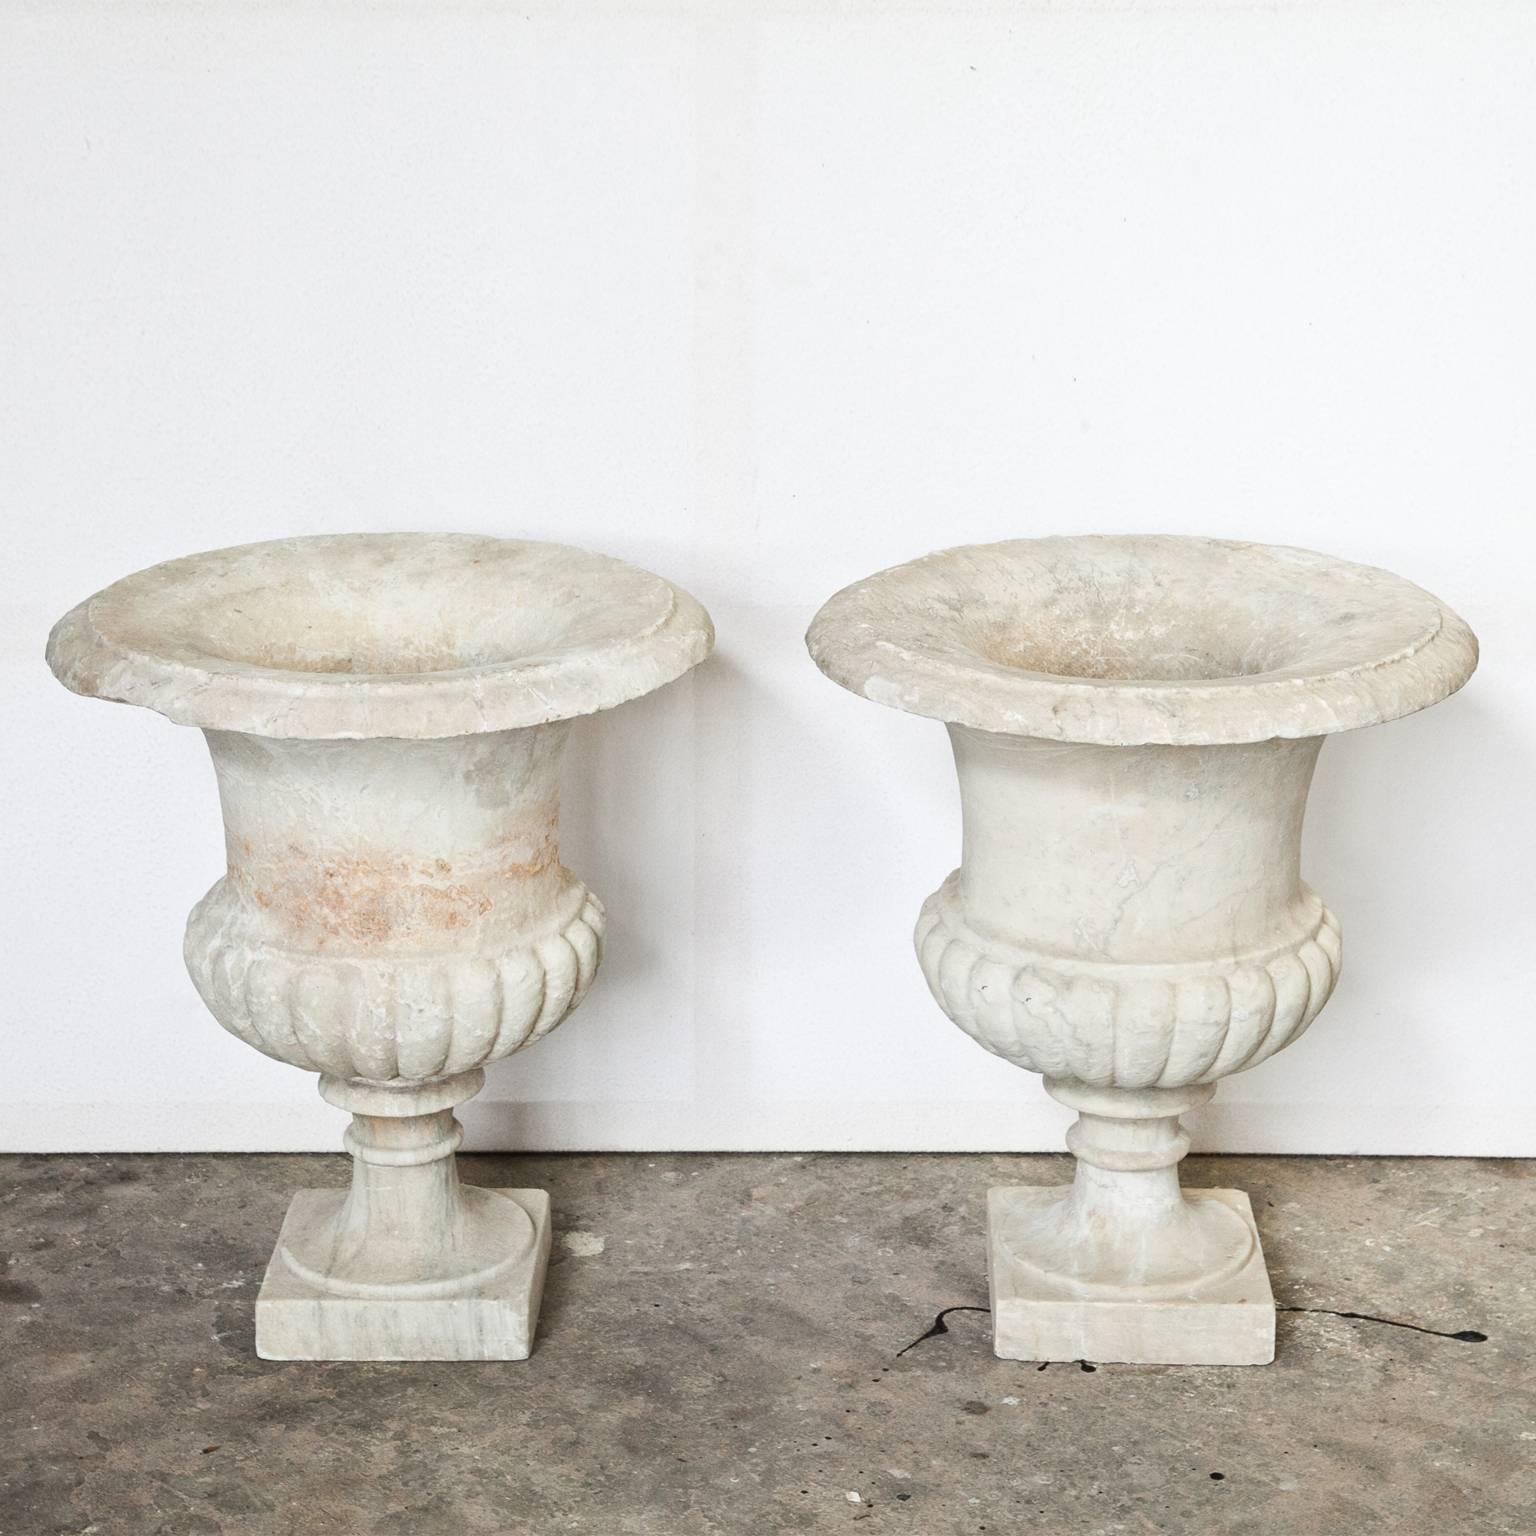 Pair of off-white Italian marble vases on baluster-shaped feet above square bases. The lower third of the vase shows a bellied, gadrooned wall. The vases have old restorations, the bases were added later.